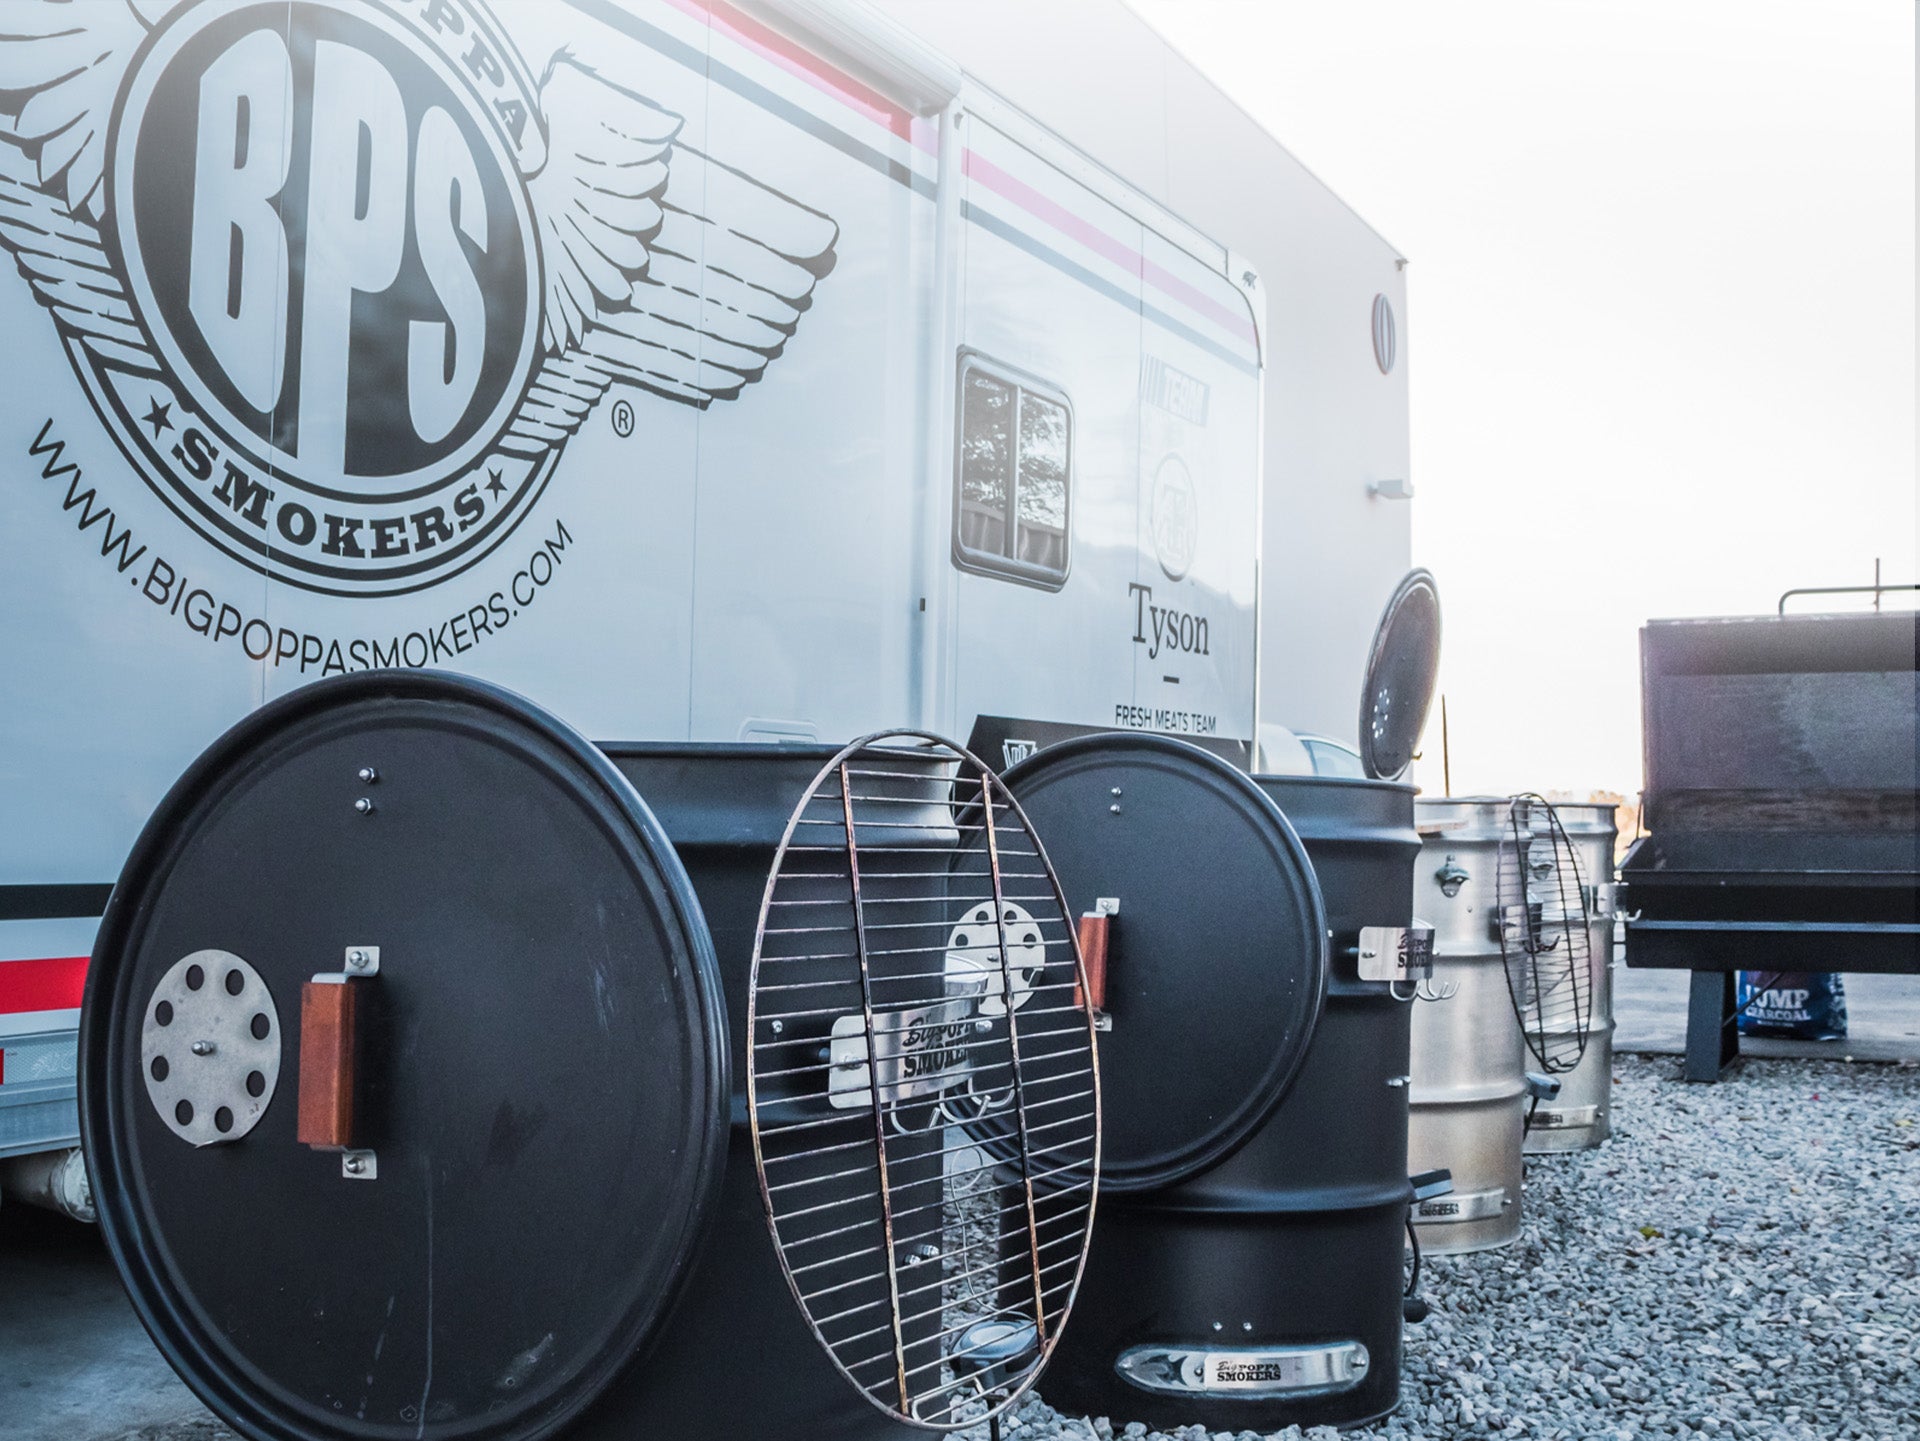 A row of black metal barrel smokers with wooden handles are lined up outside in front of a large white truck with "Big Poppa Smokers" branding.